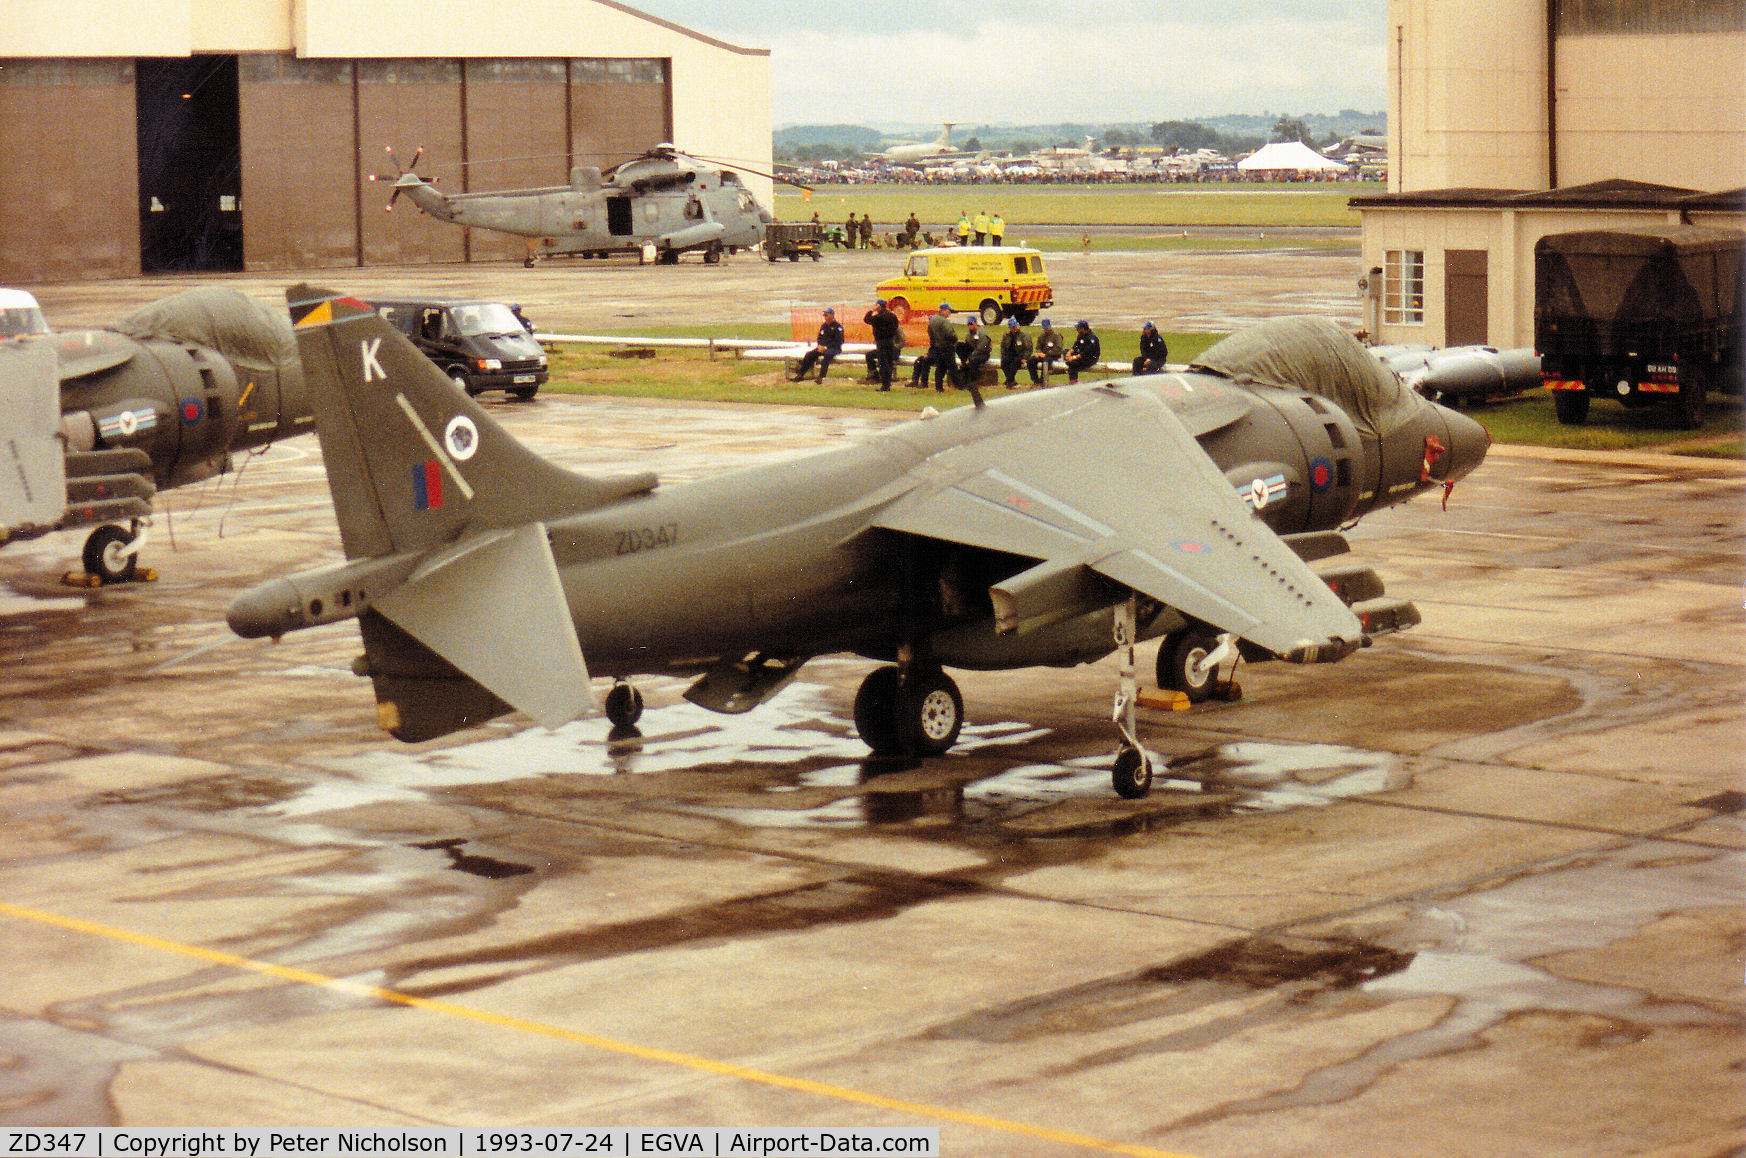 ZD347, 1988 British Aerospace Harrier GR.5 C/N P14, Harrier GR.5, callsign Wildcat 2, of RAF Wittering's 20[Reserve] Squadron on the flight-line at the 1993 Intnl Air Tattoo at RAF Fairford.